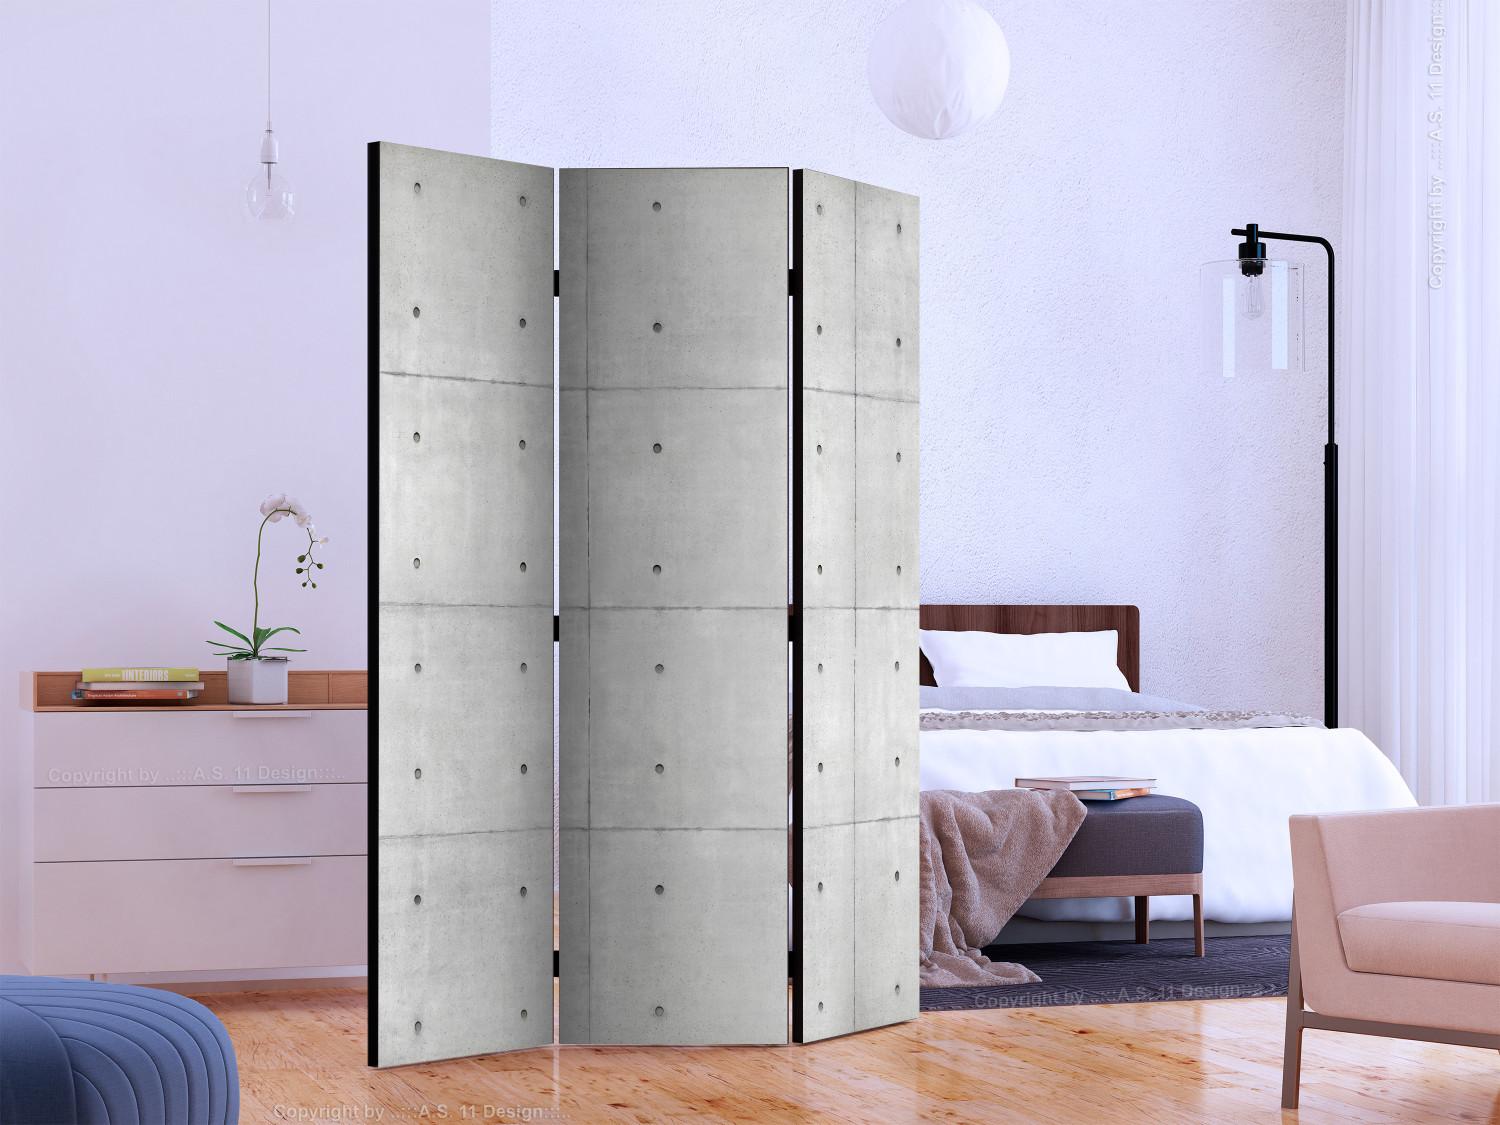 Room Divider Domino (3-piece) - simple composition with a gray concrete texture